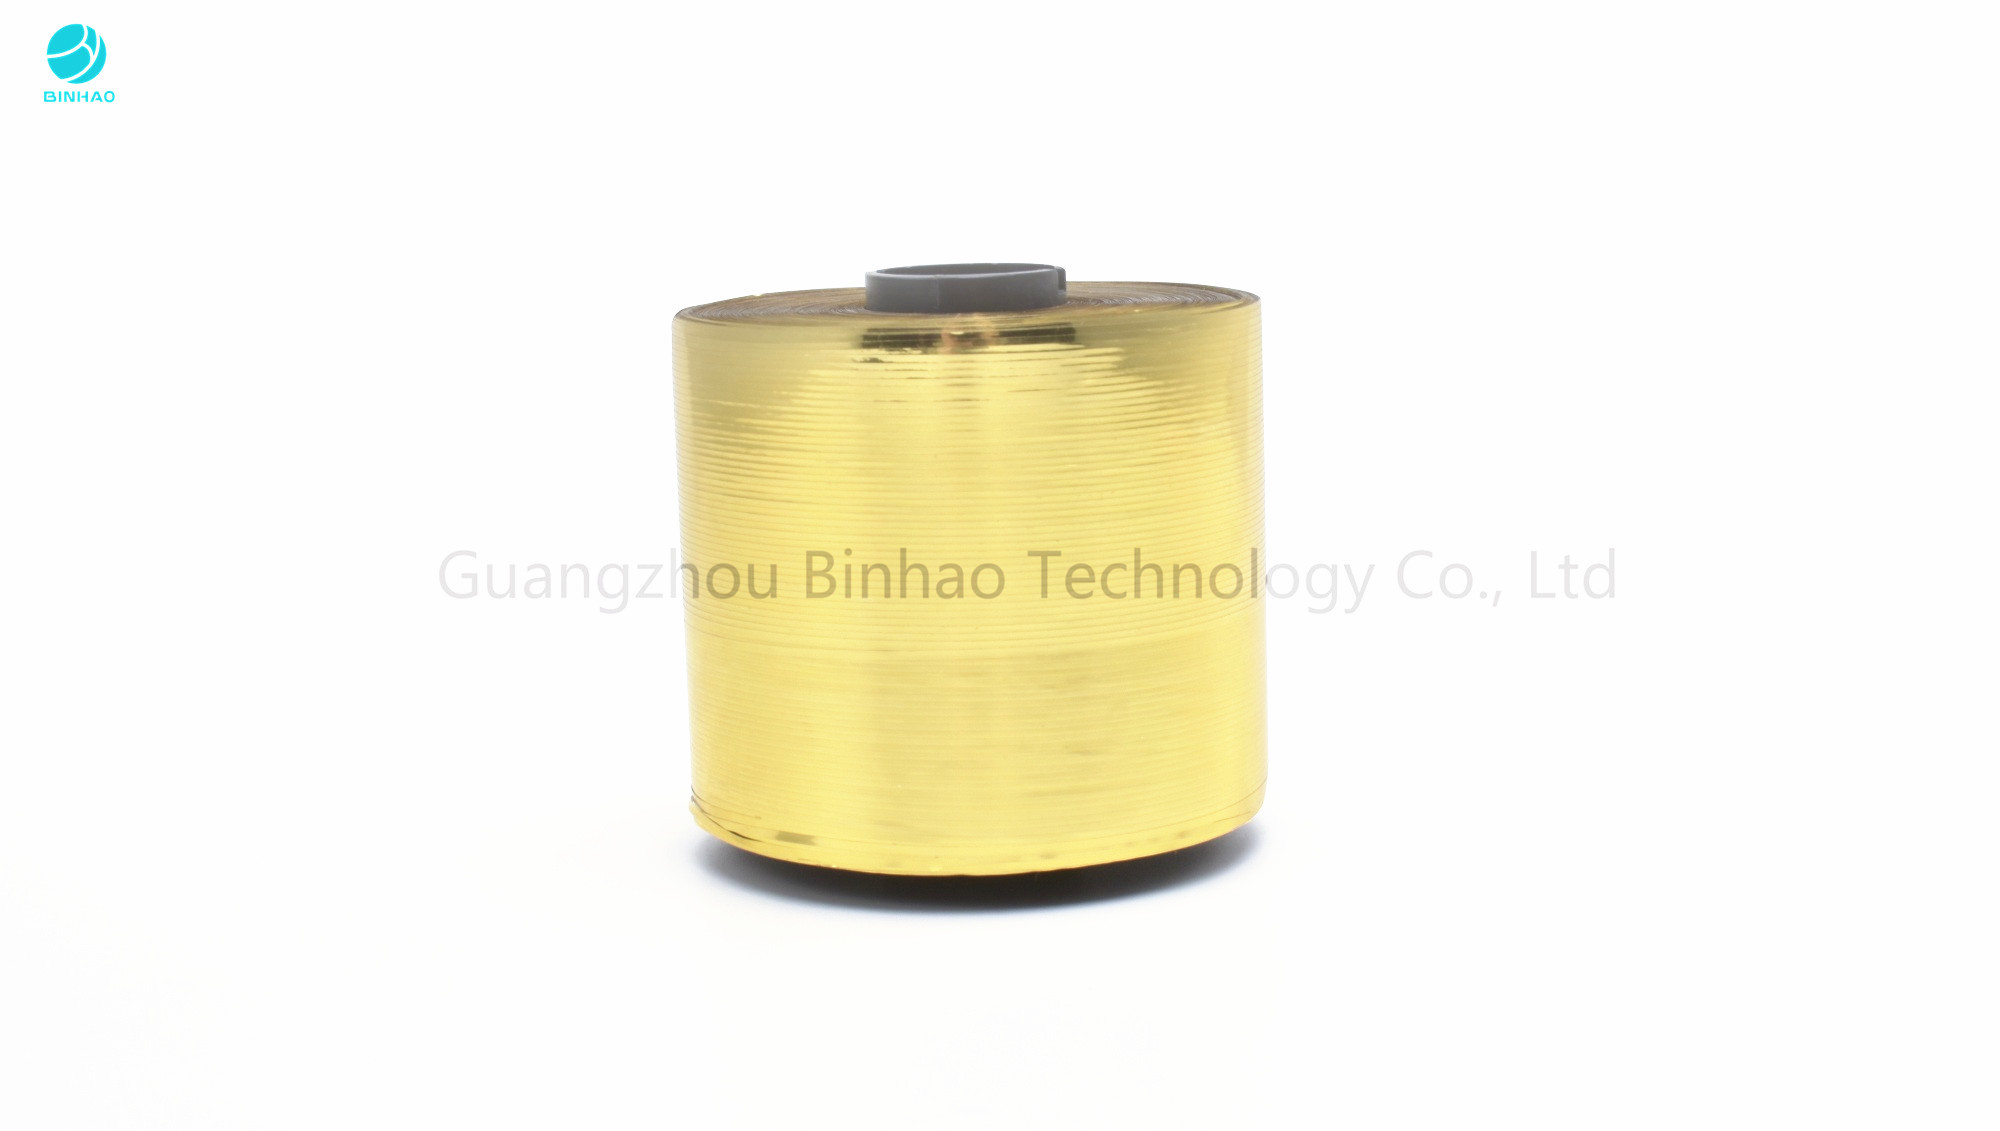 Gold Silver Metal 4mm Tobacco Tear Strip Tape For Cigarette Cosmetic Box Sealing And Good Decoration